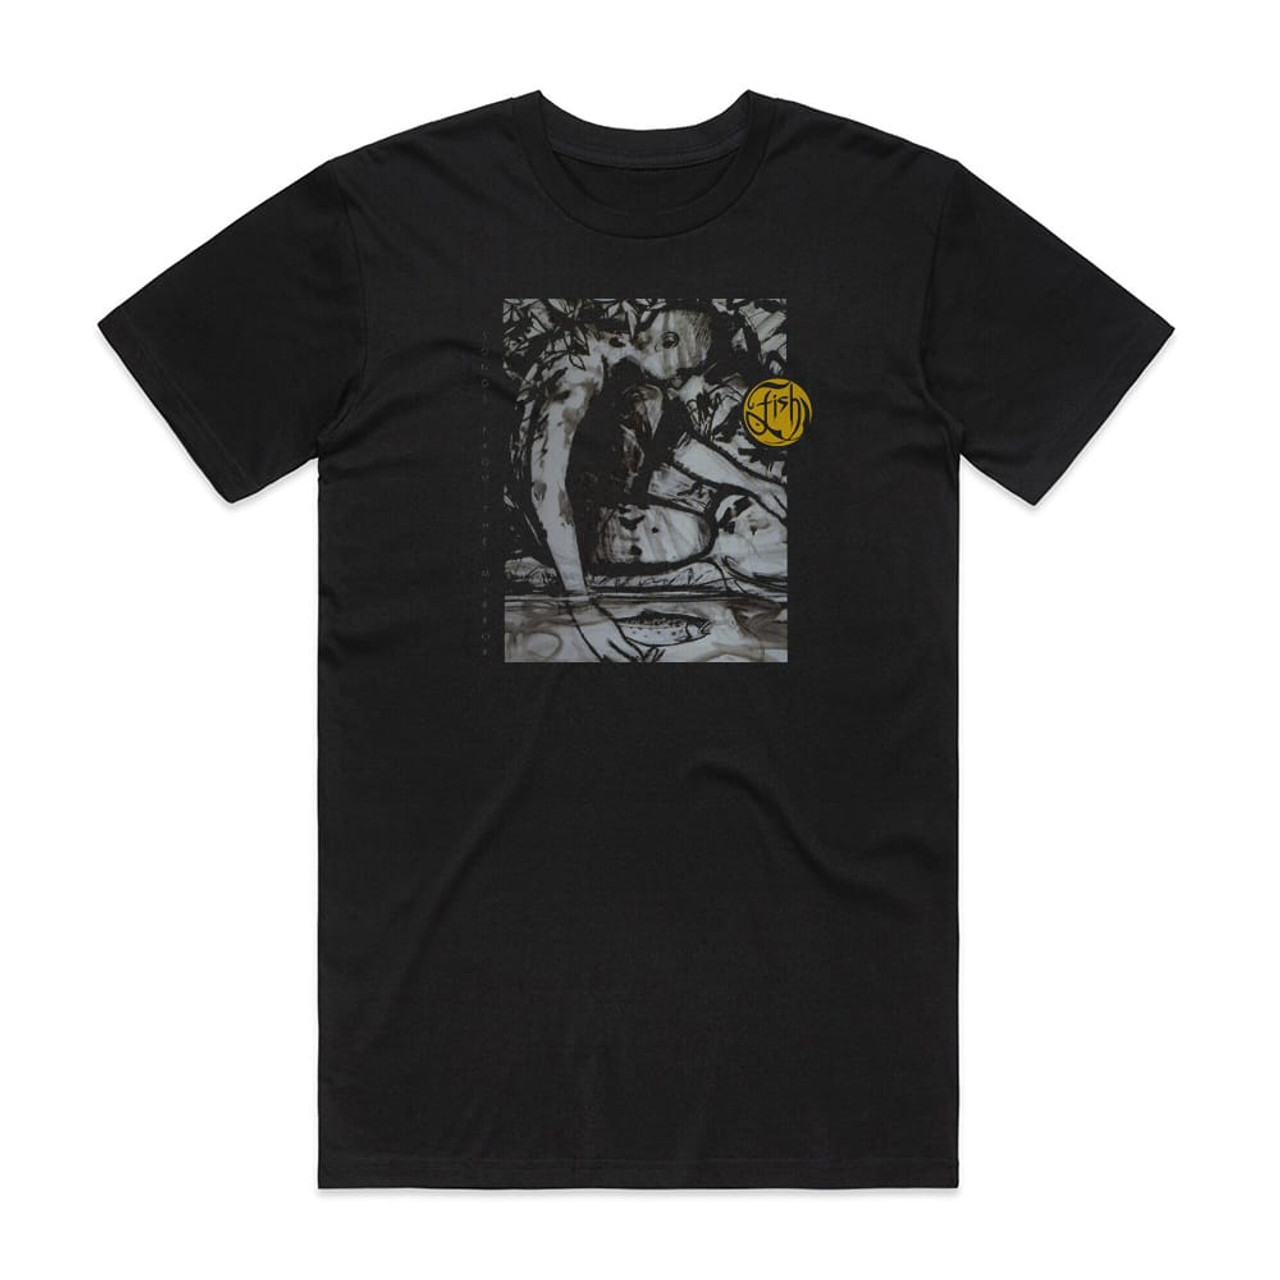 Fish Songs From The Mirror 1 Album Cover T-Shirt Black